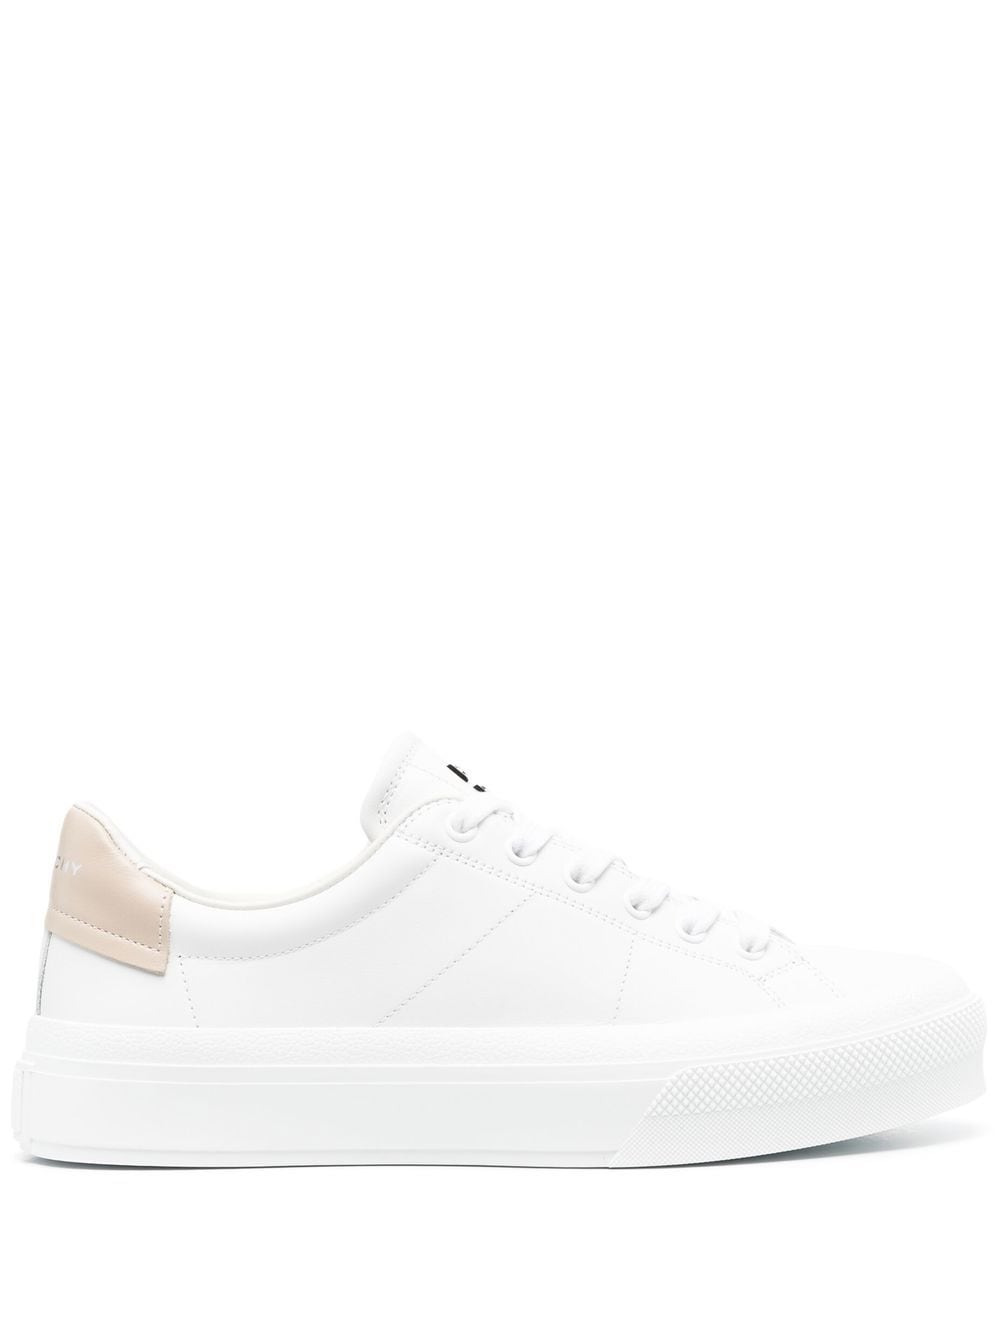 Givenchy two-tone low-top sneakers - White von Givenchy